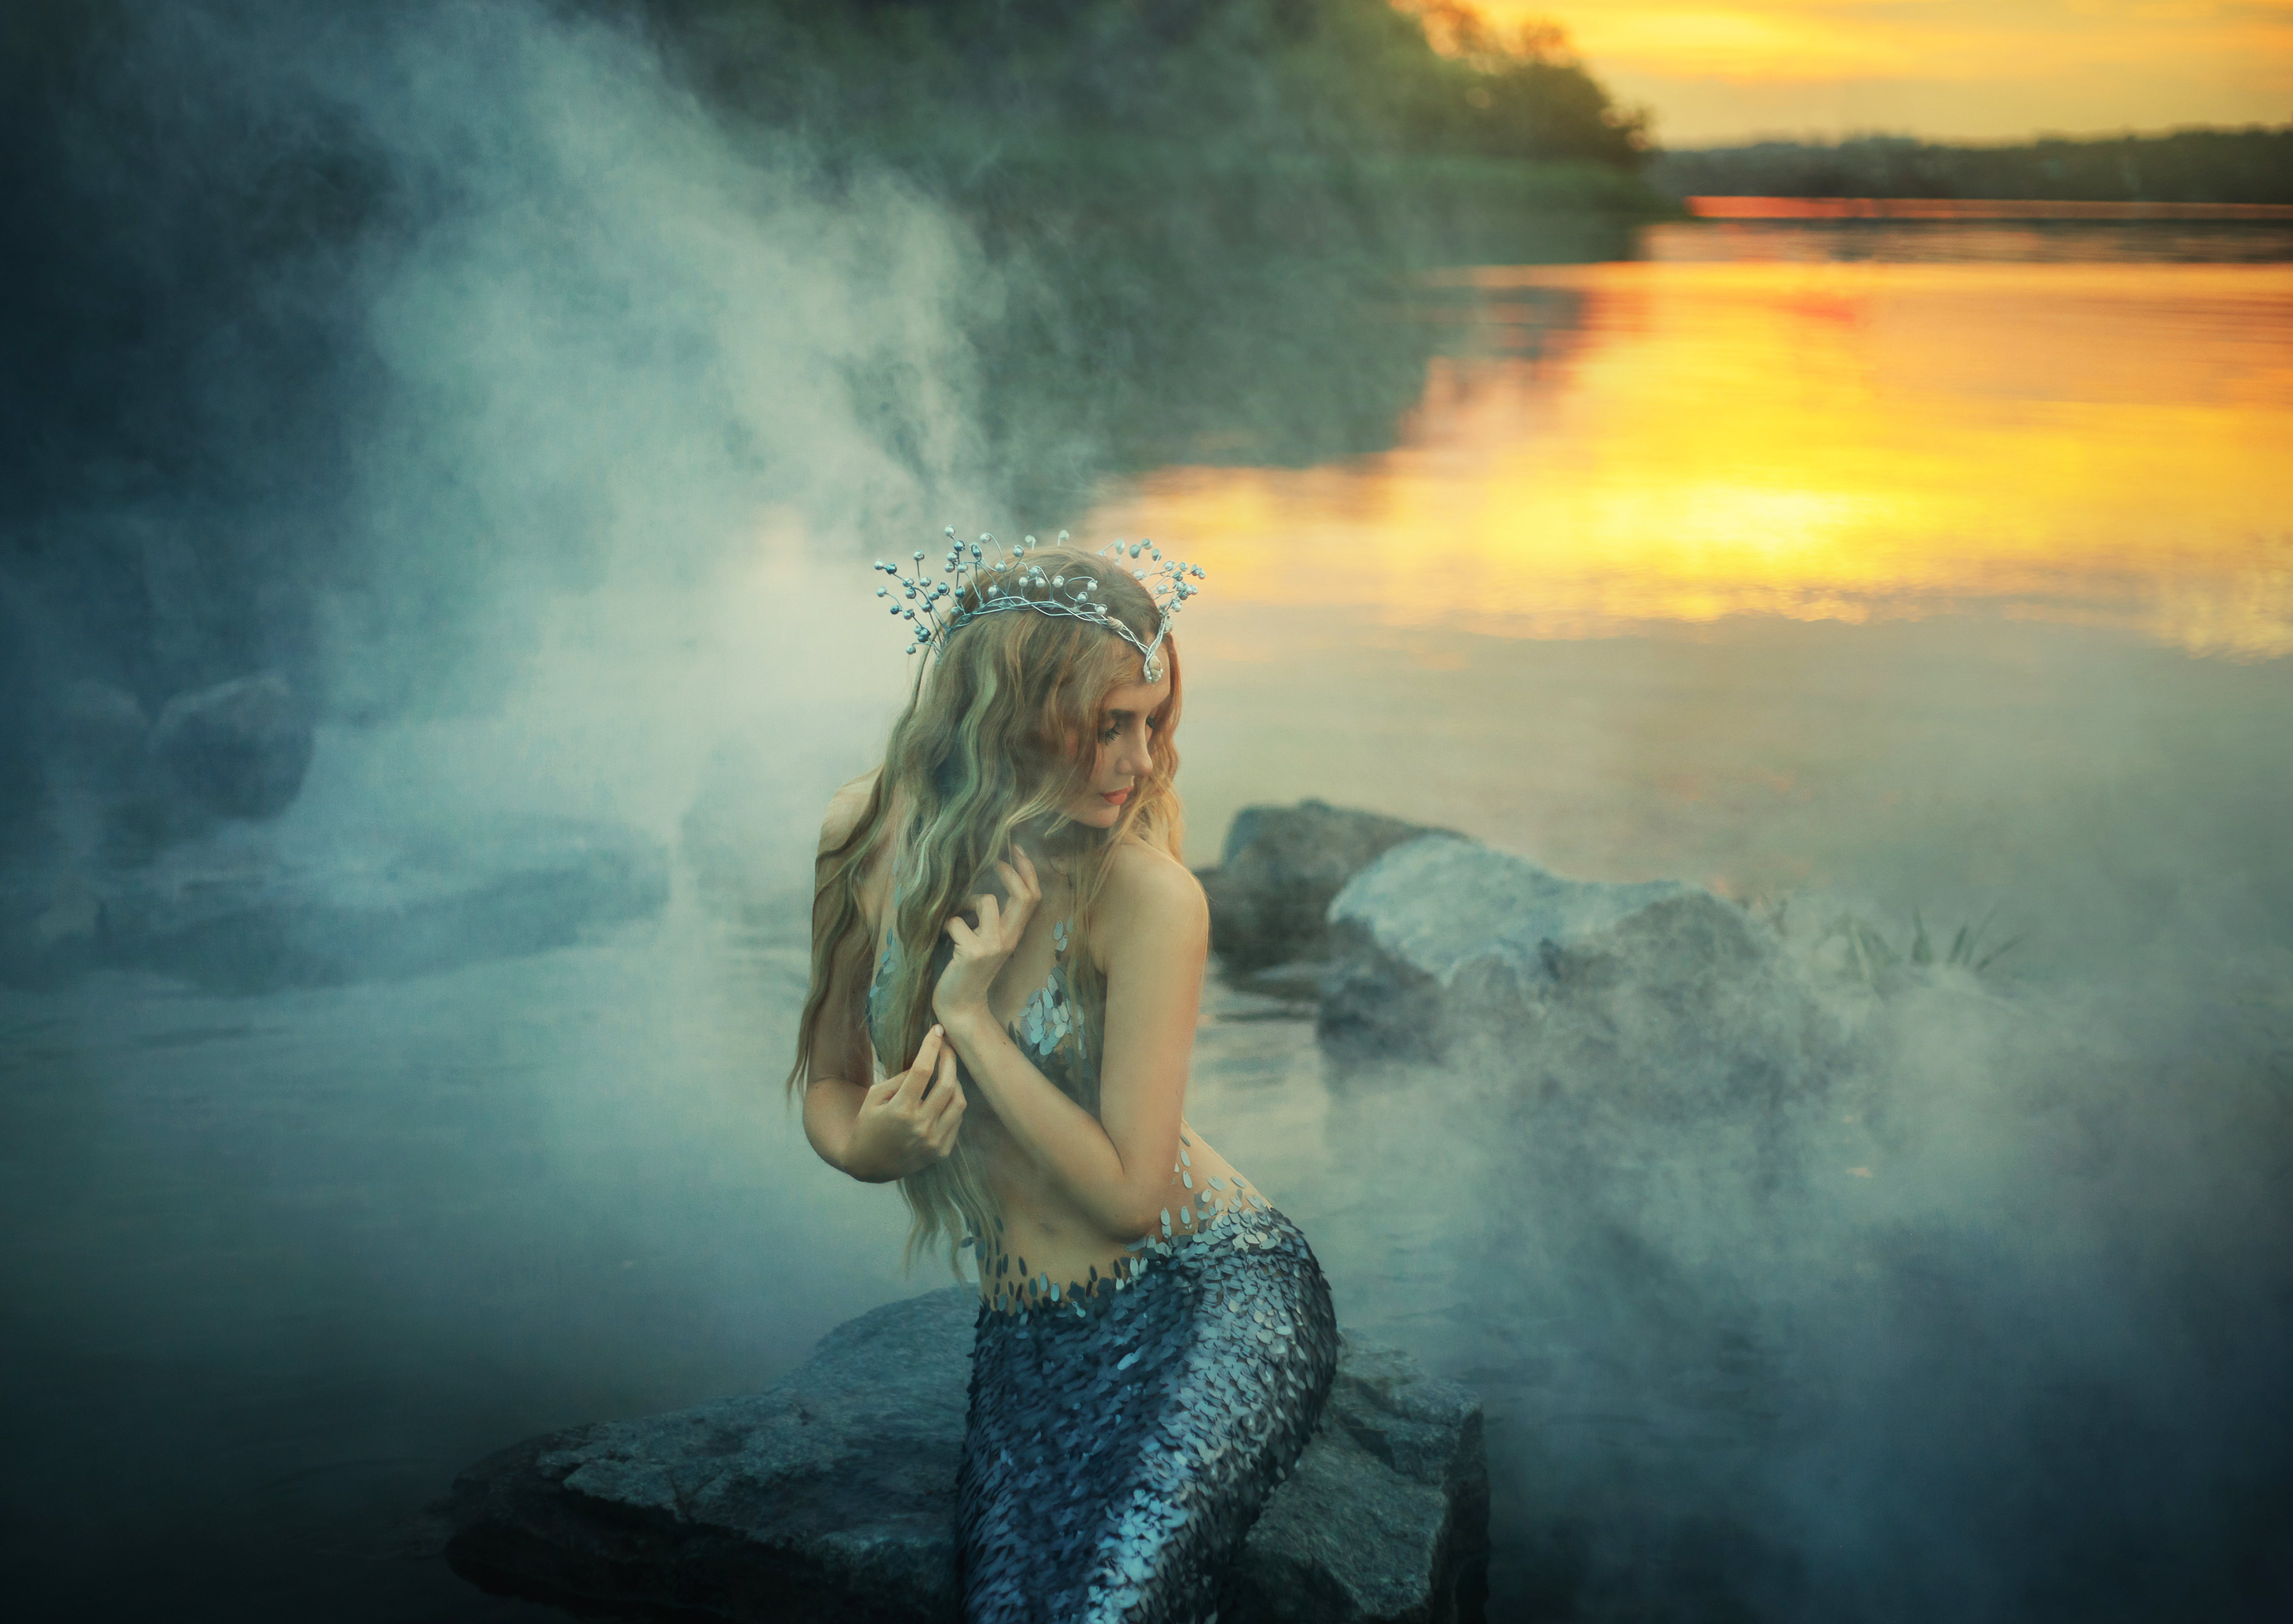 An image of a siren sitting on rocks